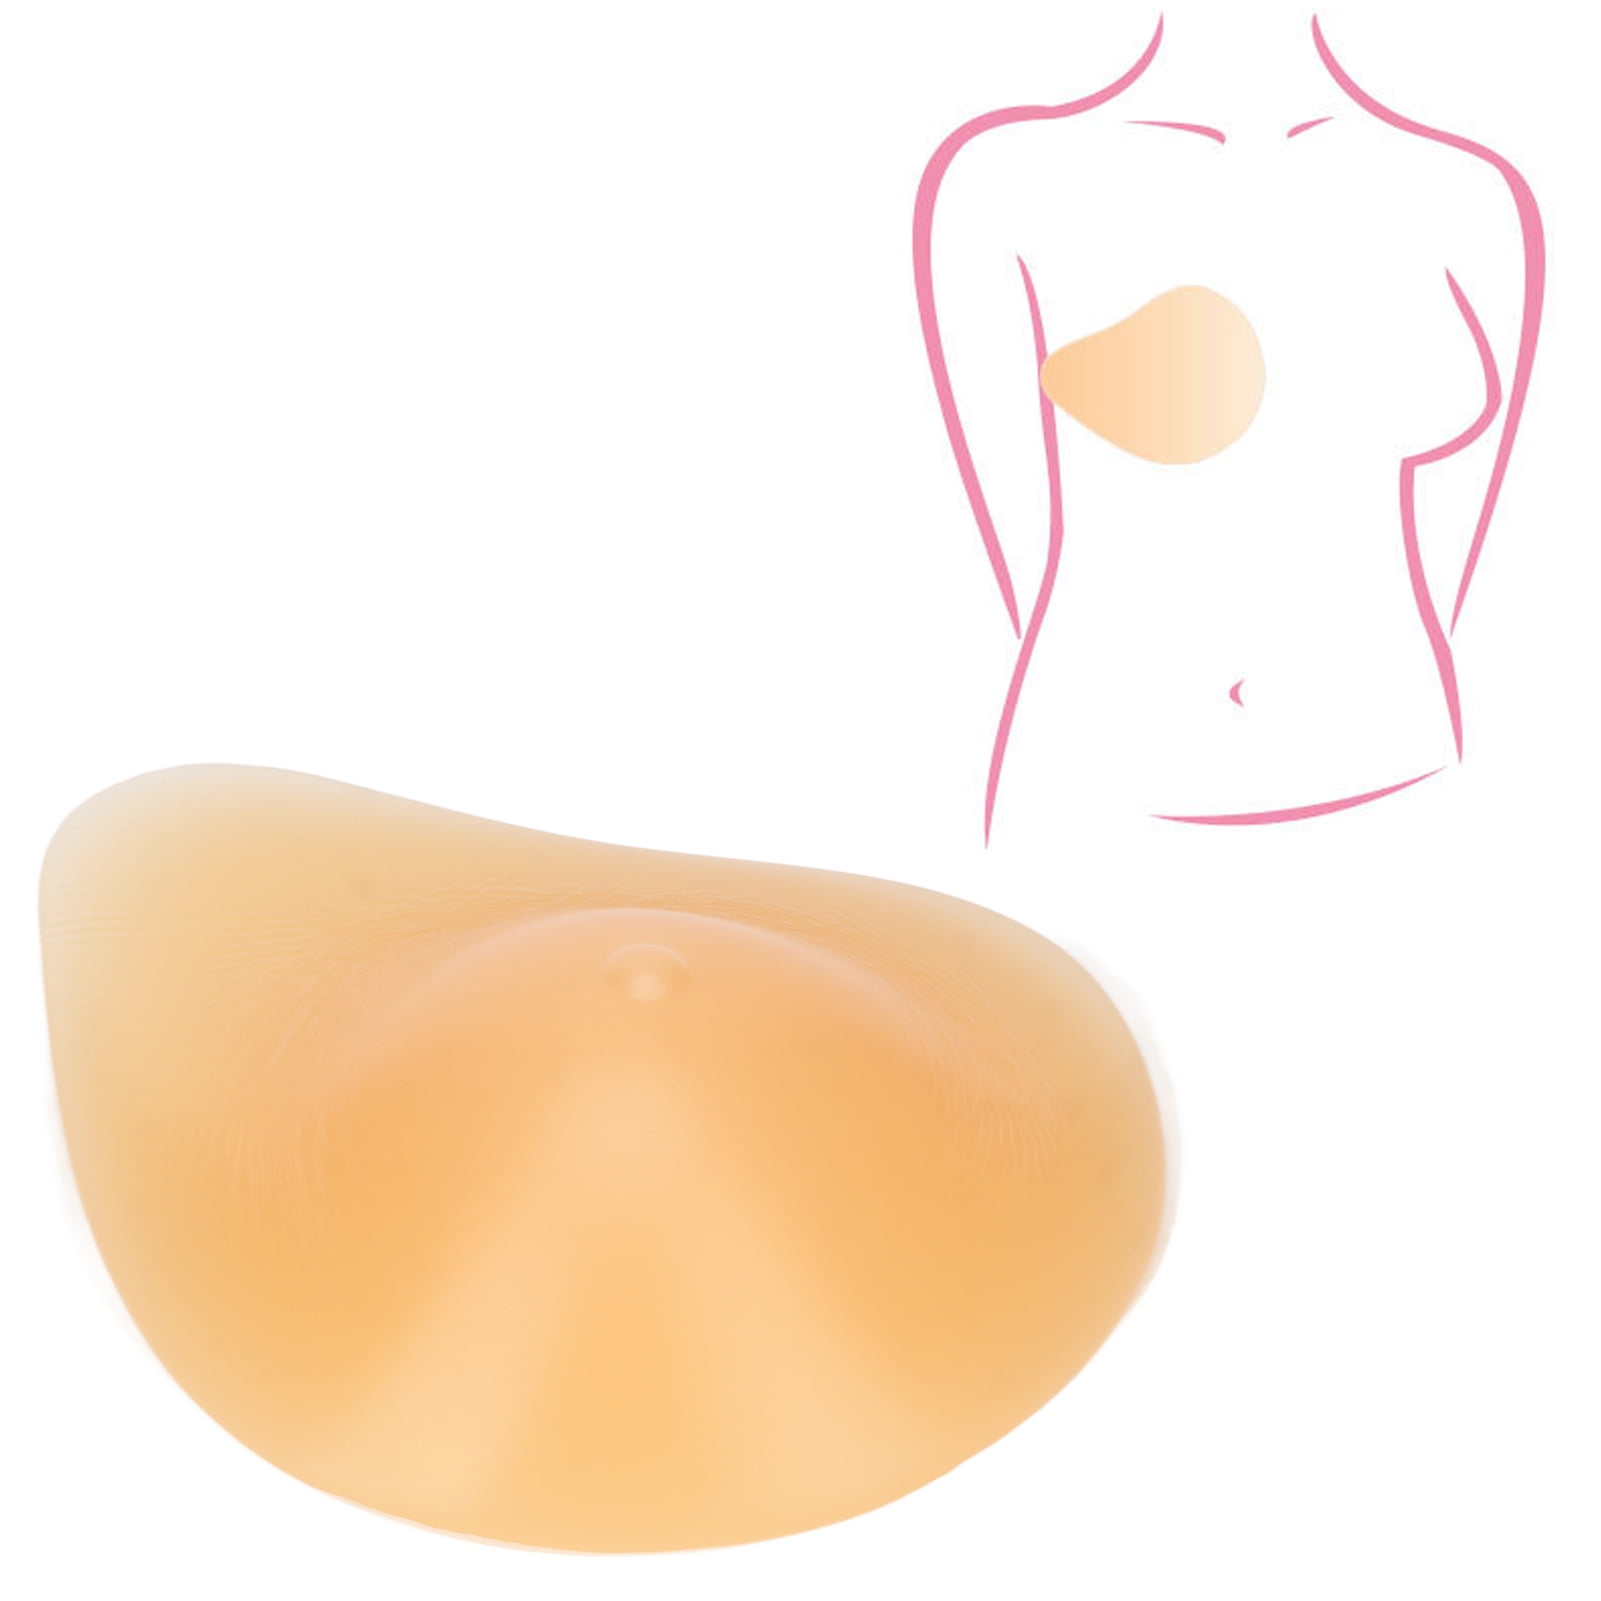 donny kuntz recommends silicone breast forms walmart pic